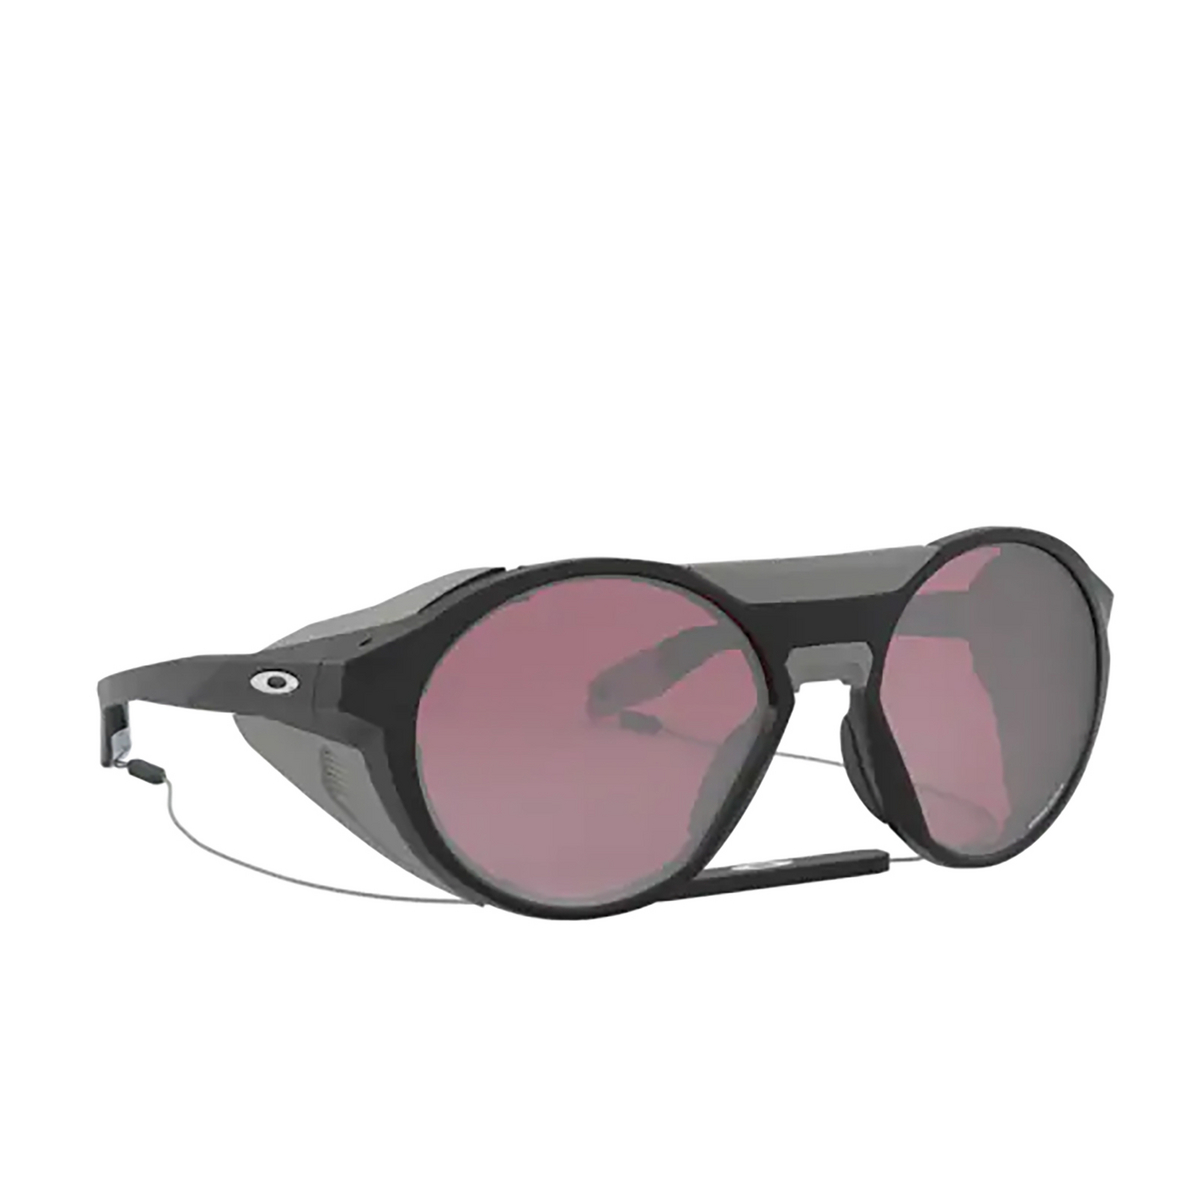 OO9440 Clifden Round Sunglasses,